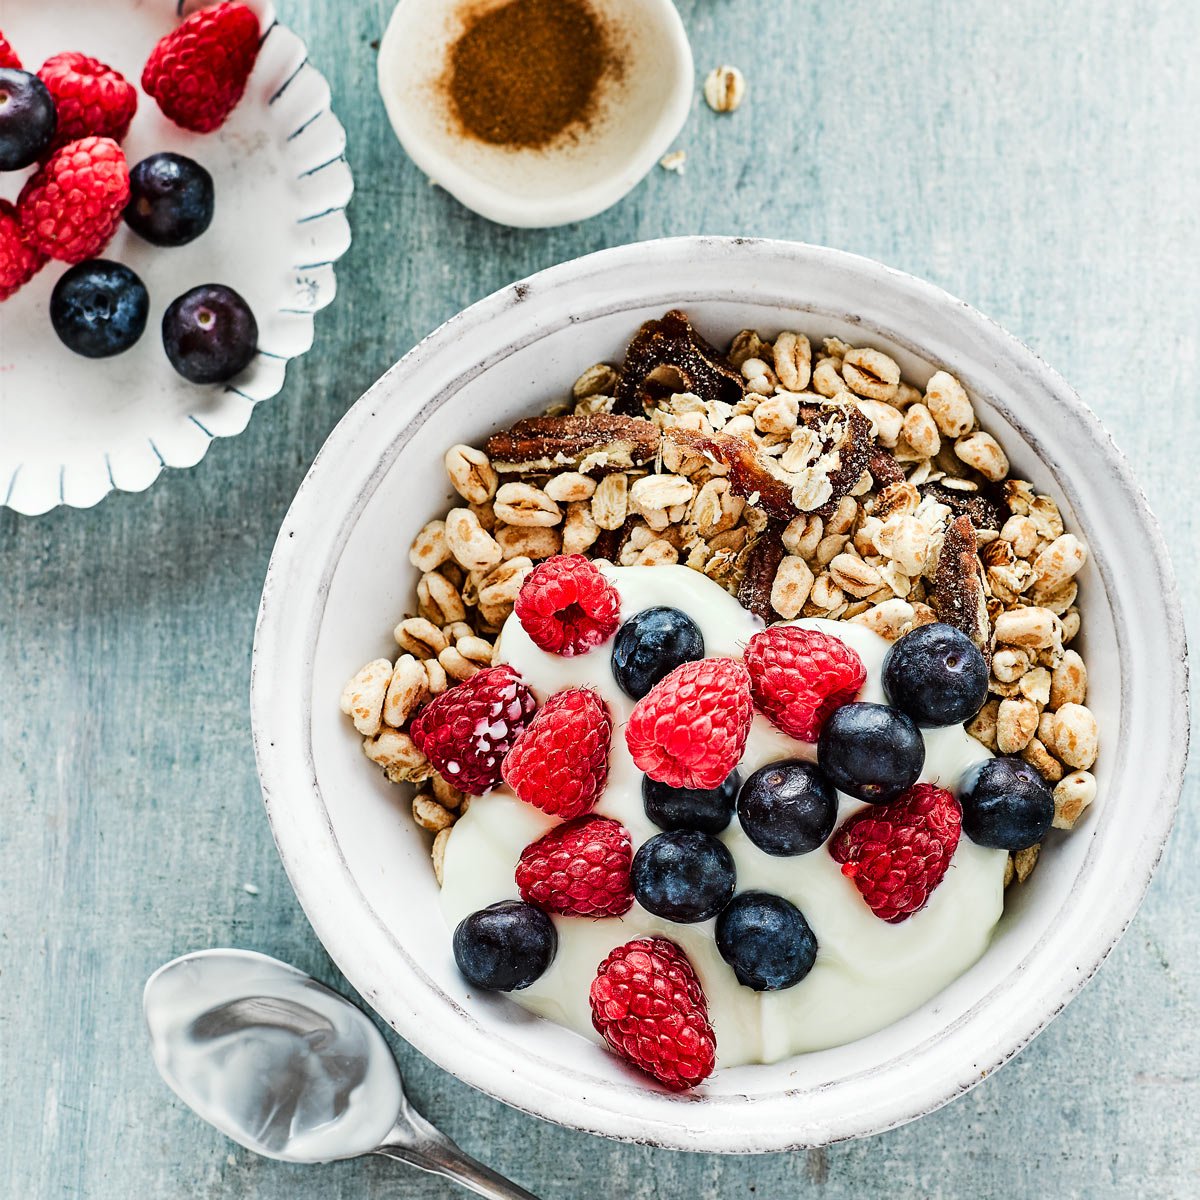 Homemade Muesli with Oats, Dates and Berries | Beanstalk Single Mums